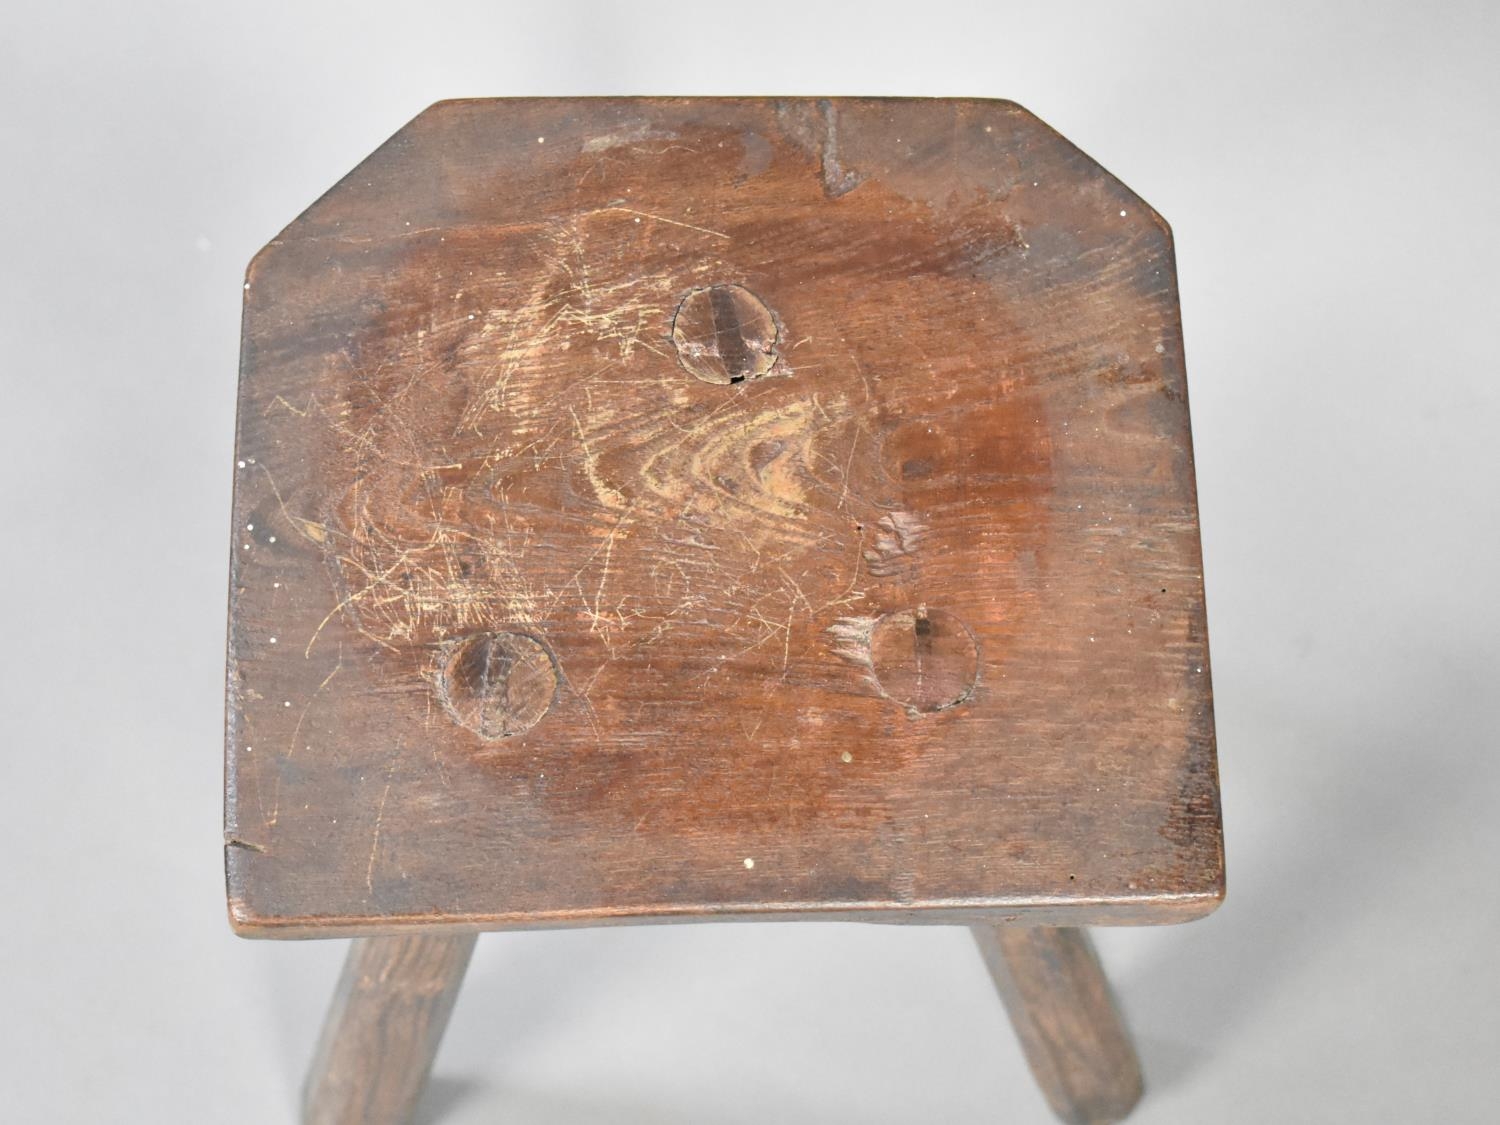 A Vintage Rustic Three Legged Stool with Rectangular Top, 43cms High - Image 2 of 2